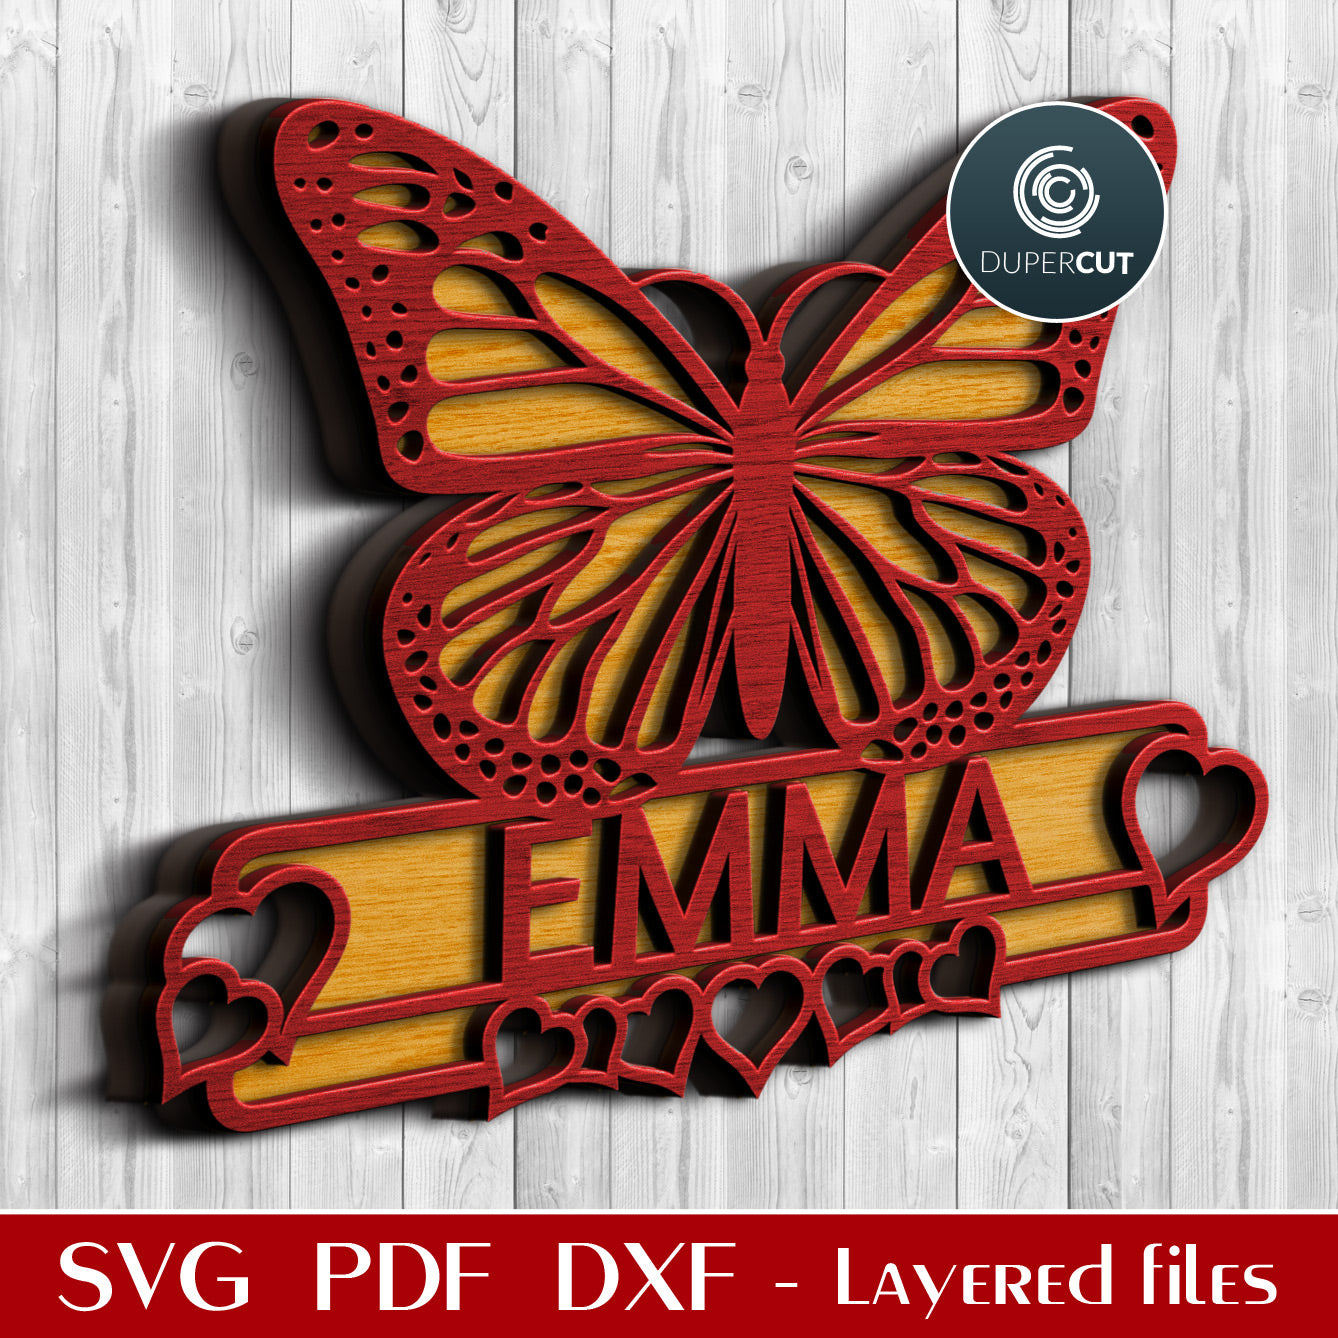 Butterfly name sign, add custom text personalized gift for girls - SVG DXF vector layered cutting files for Glowforge, Cricut, Silhouette Cameo, laser cutting machines by DuperCut